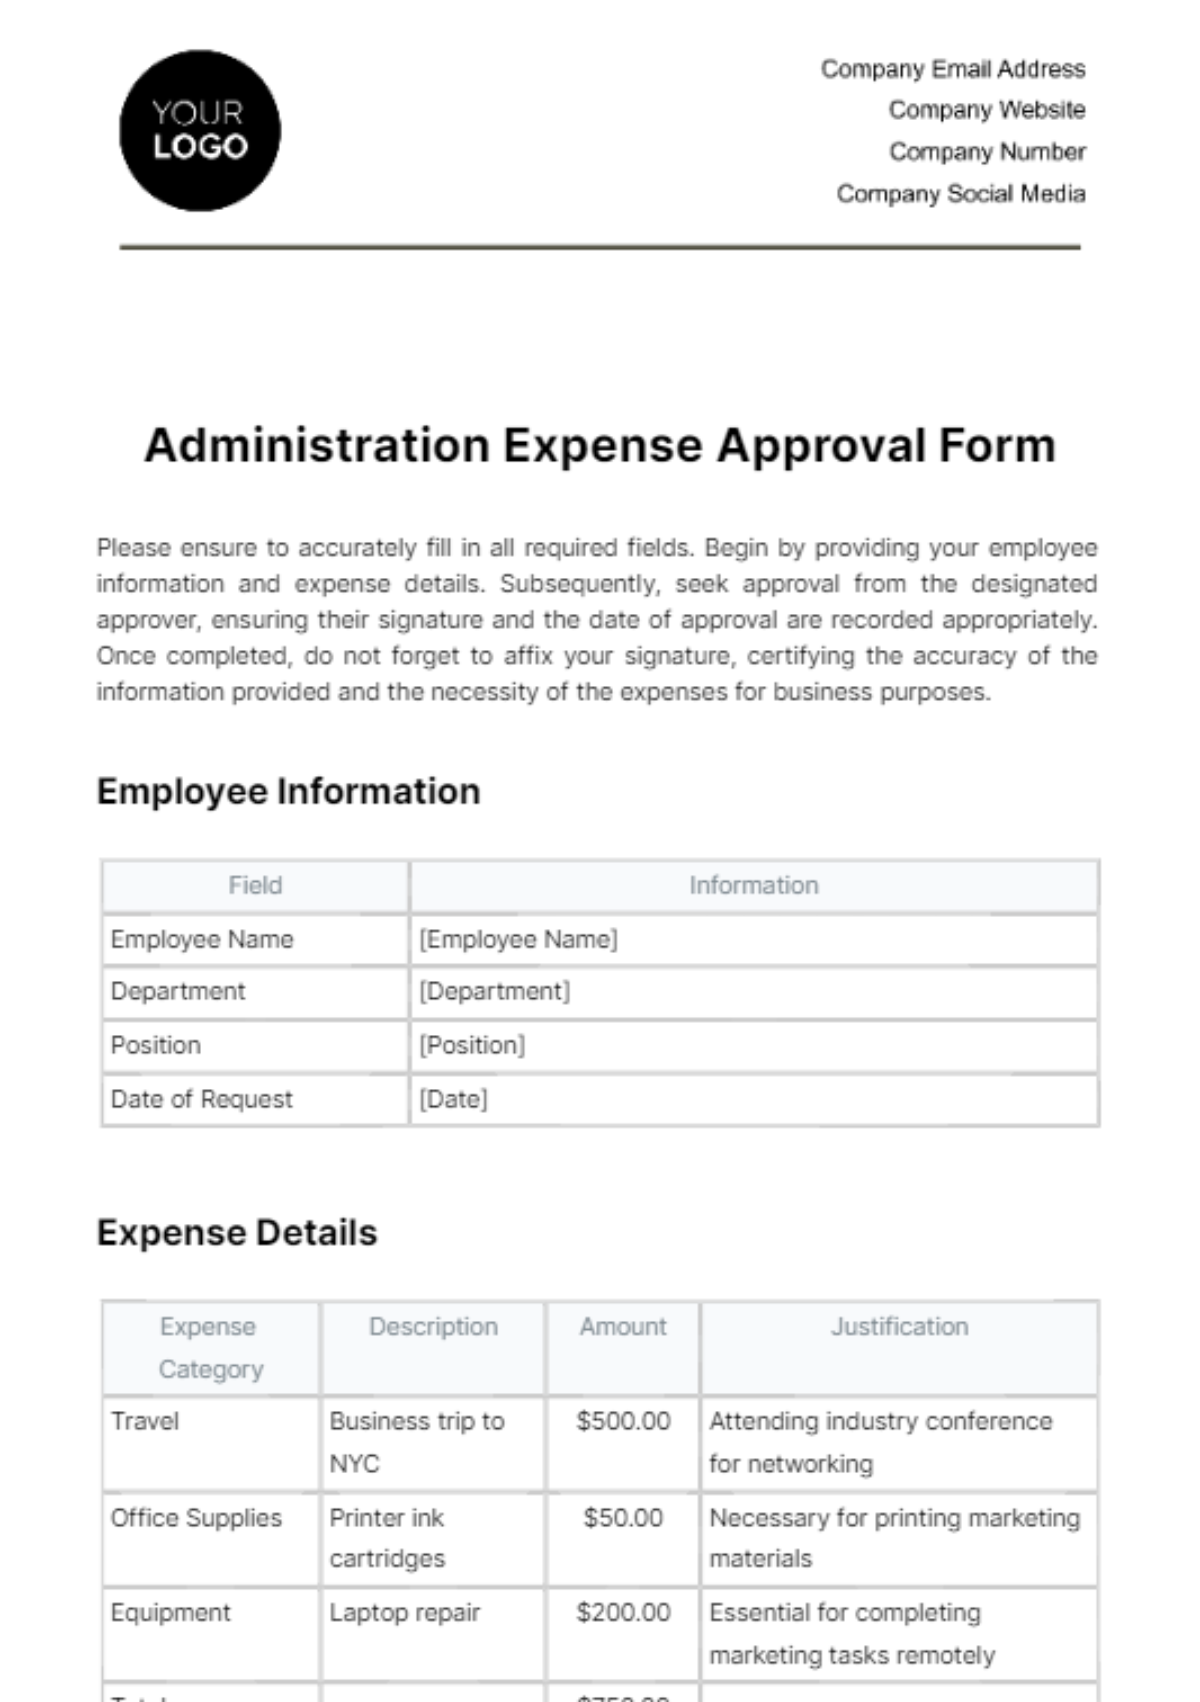 Free Administration Expense Approval Form Template